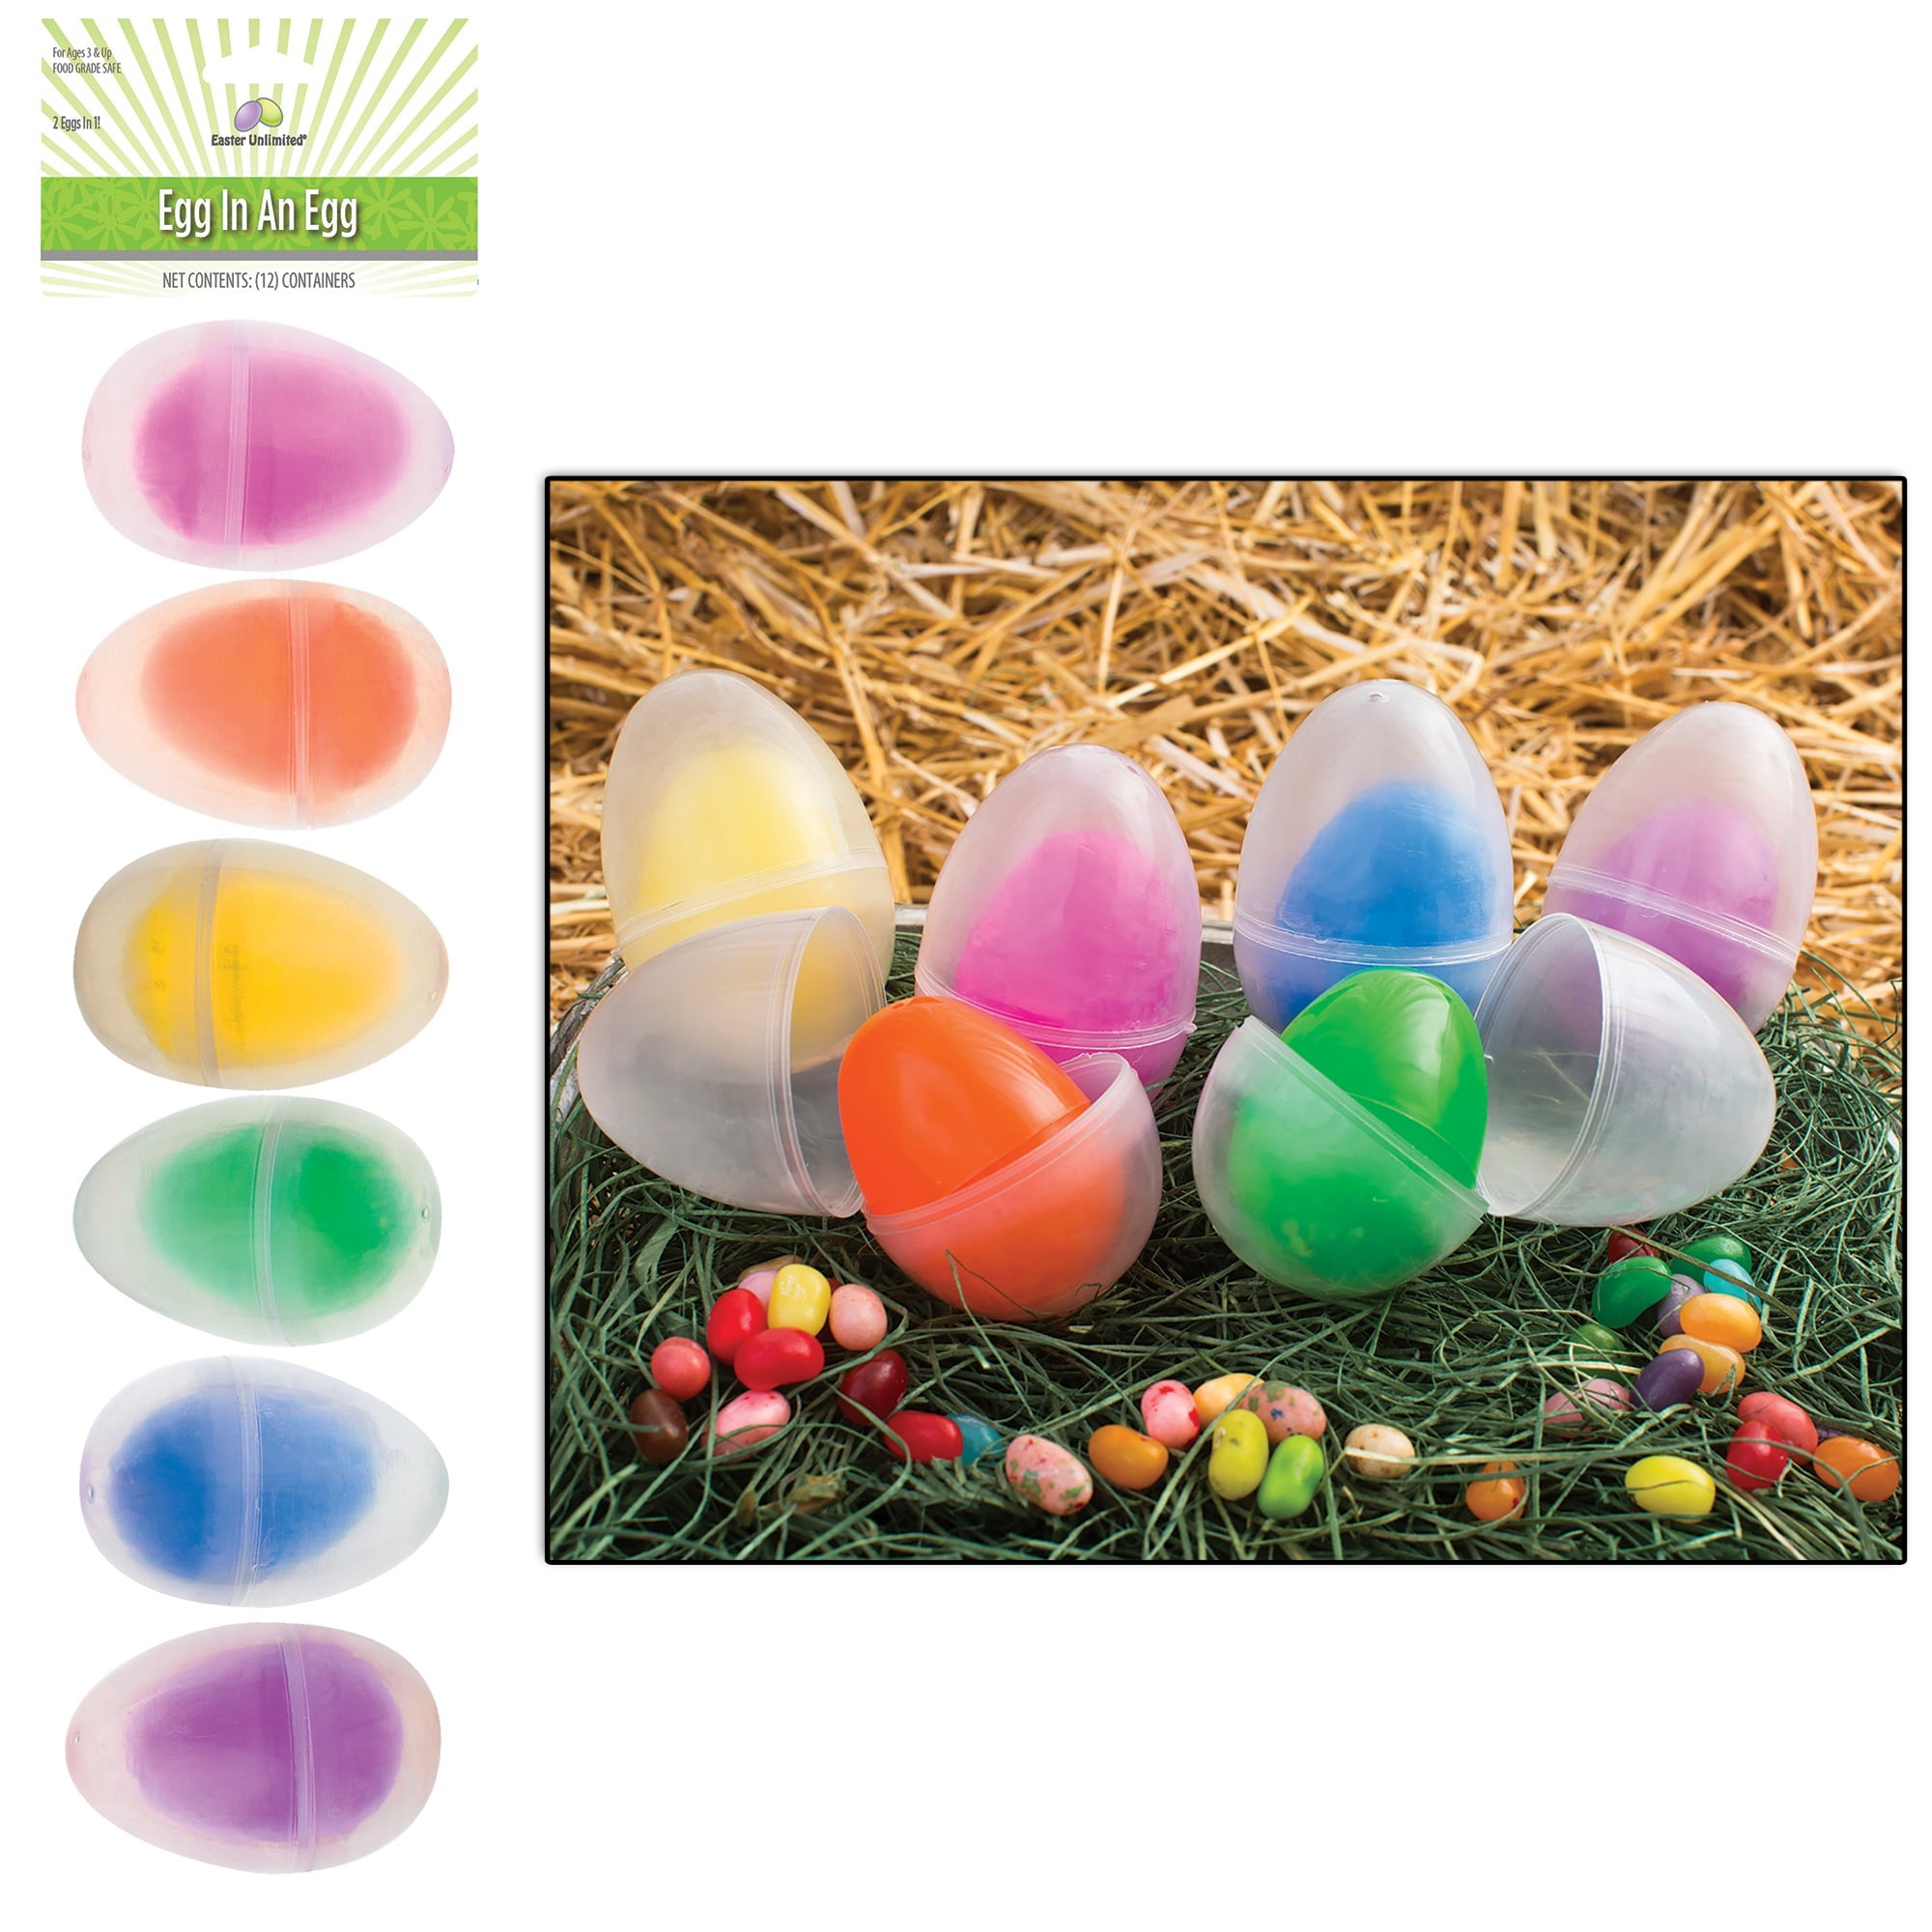 Blue Details about   NEW Sullivan Brand Easter Eggs Lot of 24 Multi-Colored Eggs,Yellow Brown 